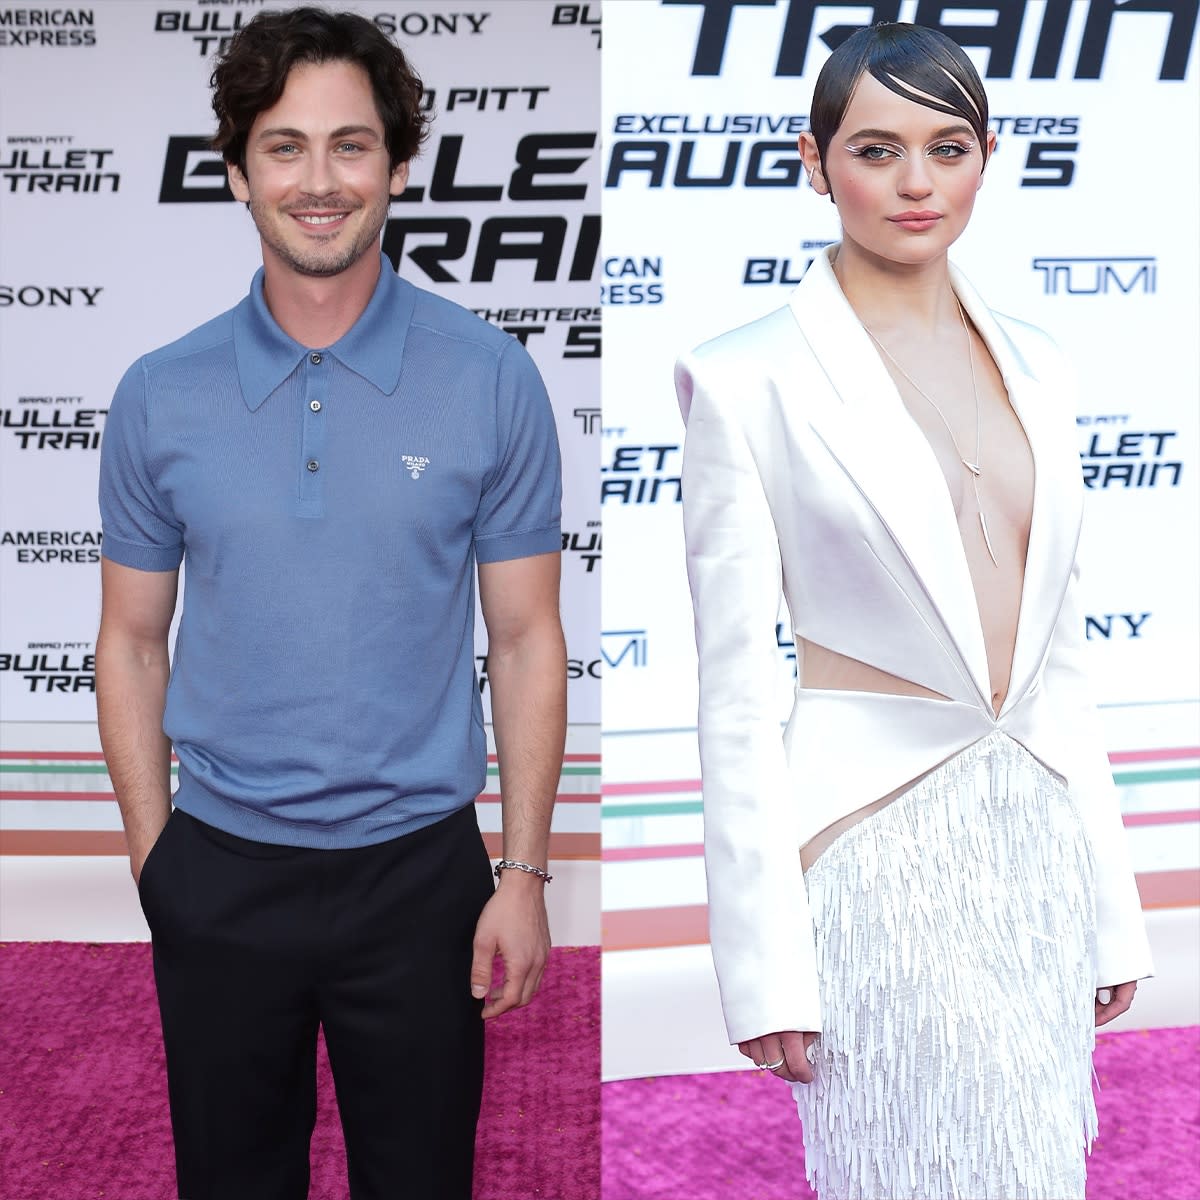 Bullet Train 's Logan Lerman and Joey King Will Reunite in We Were the